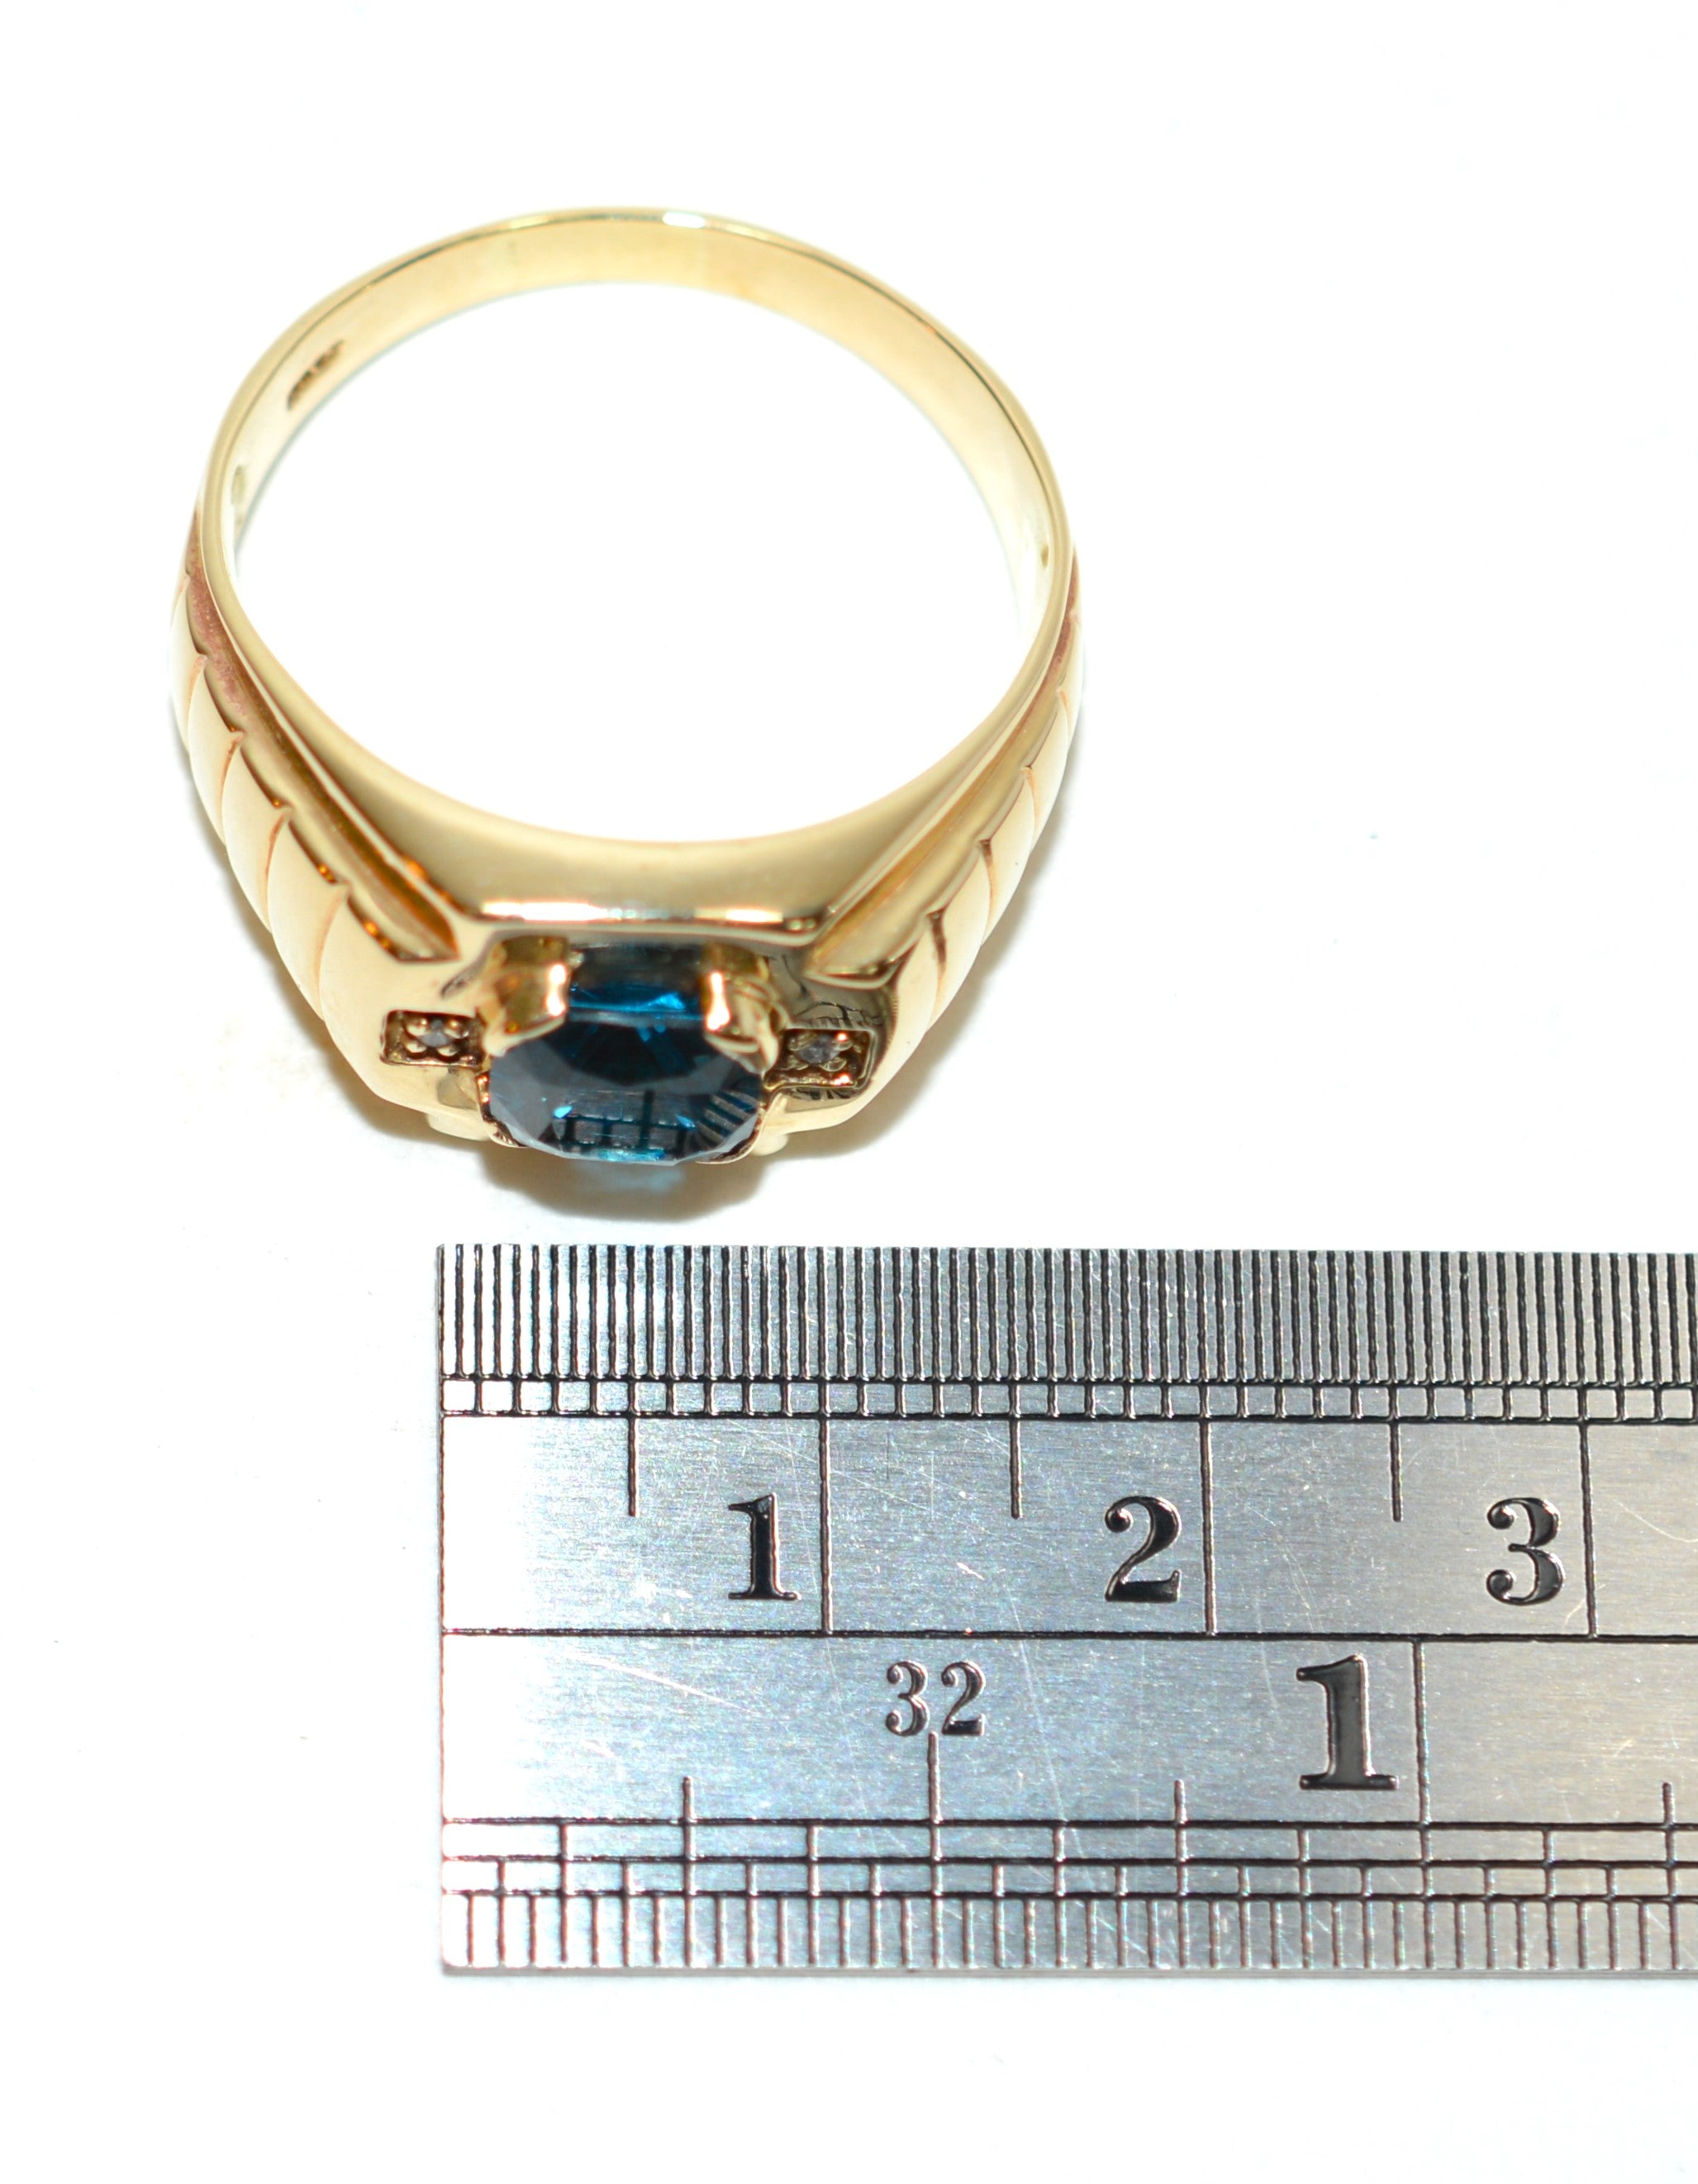 Natural London Blue Topaz & Diamond Ring 10K Solid Gold 1.46tcw Mens Ring March Birthstone Ring Statement Ring Estate Jewelry Topaz Ring